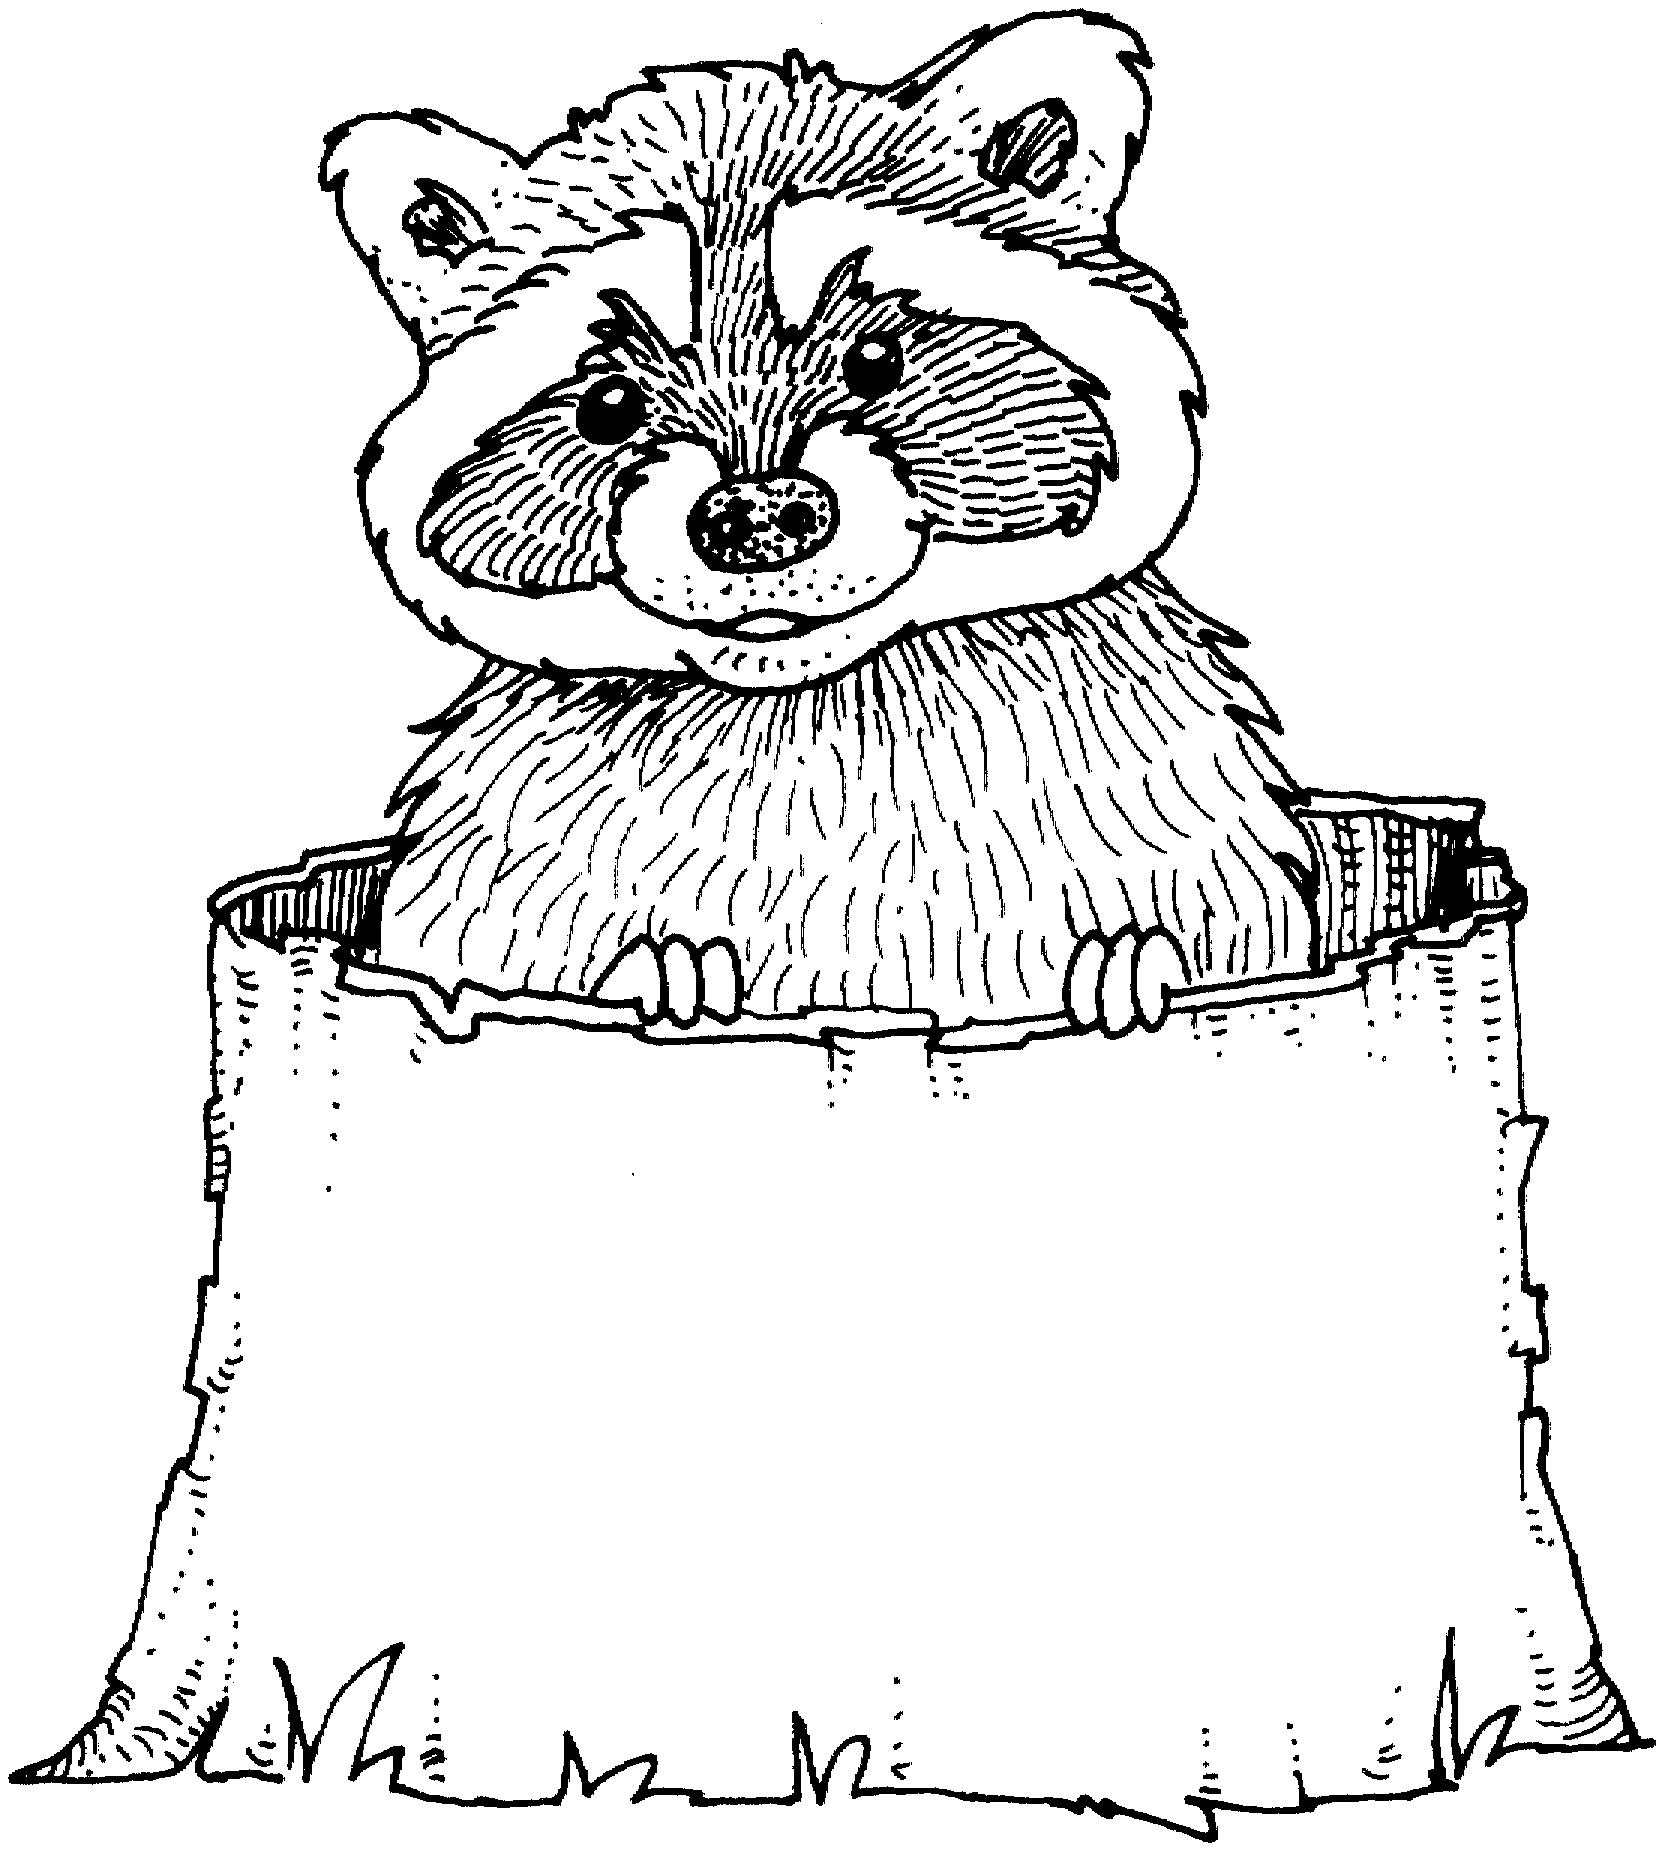 Coloring Page Of A Raccoon - Coloring Home